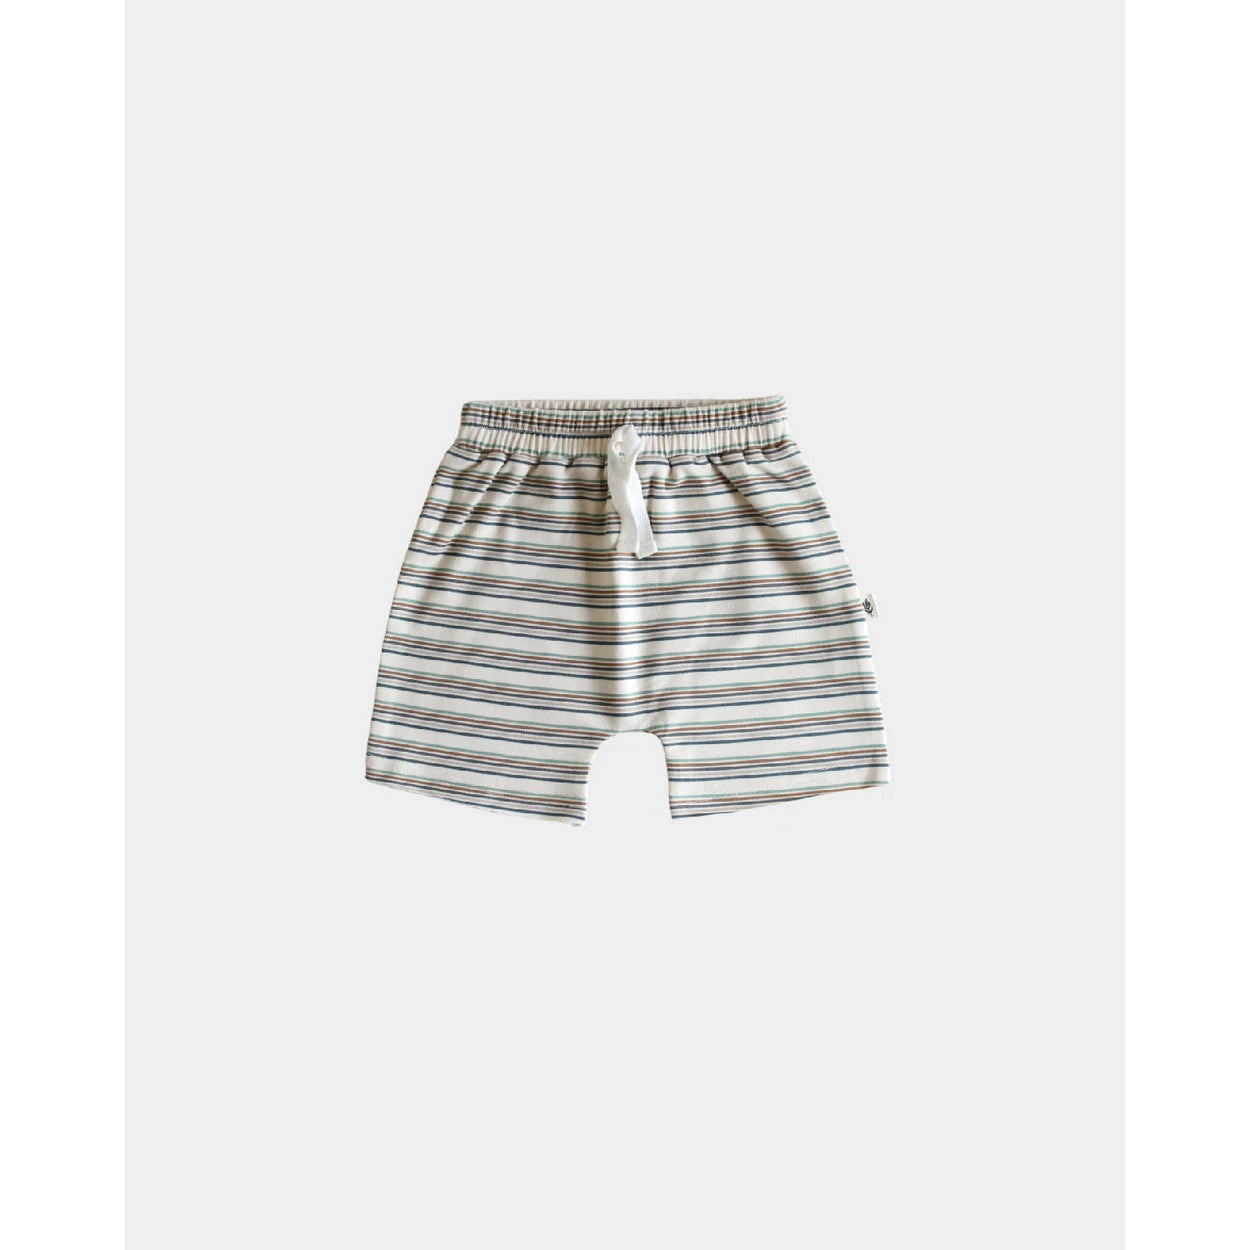 Baby Sprouts Vintage Stripe Boys Harem Shorts-Baby Sprouts-Little Giant Kidz